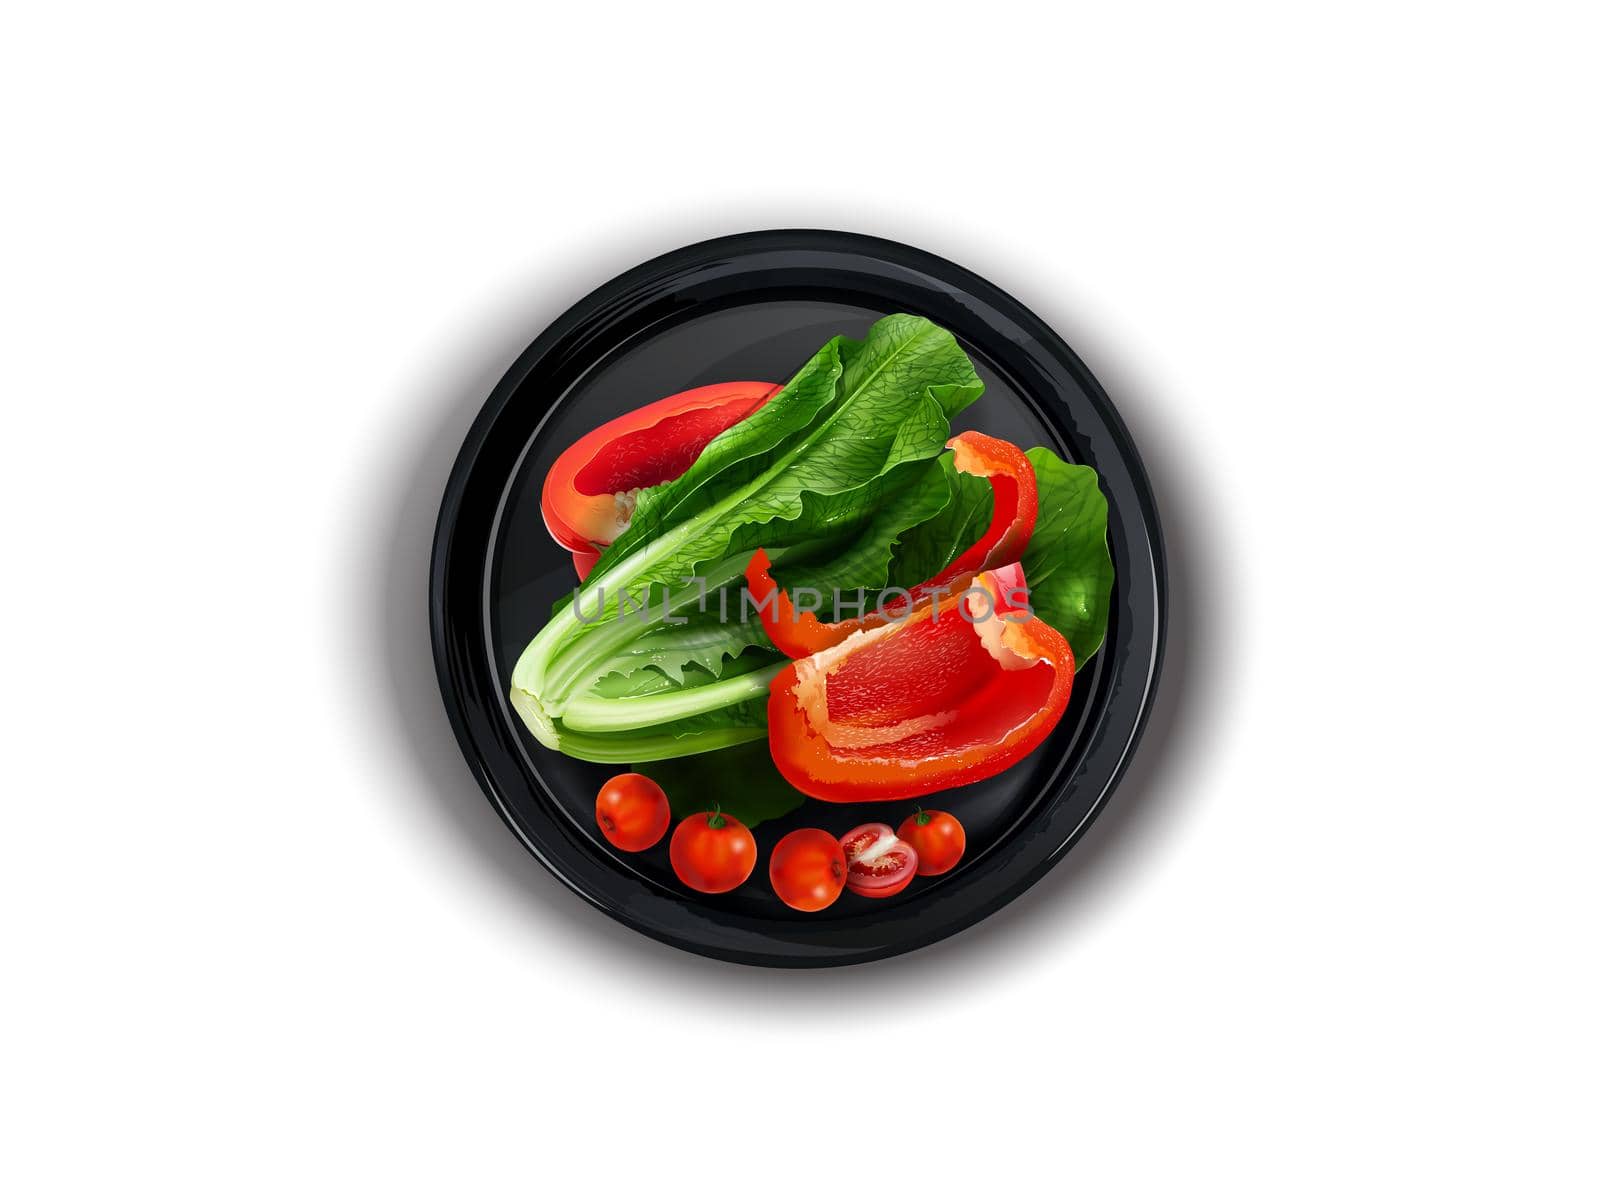 Black plate with bell pepper slices, lettuce and cherry tomatoes on a white background, top view. Realistic style illustration.